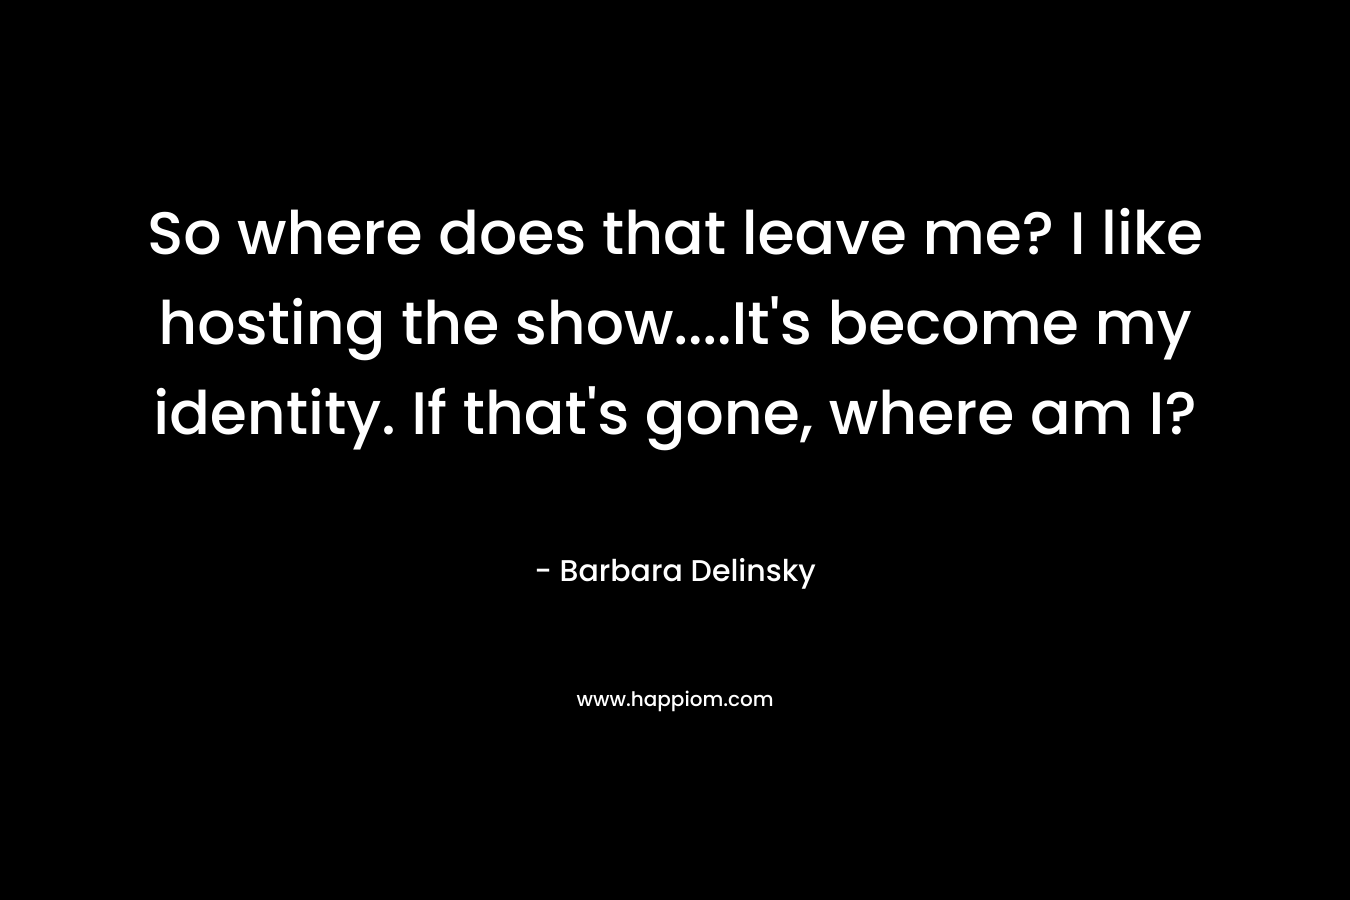 So where does that leave me? I like hosting the show….It’s become my identity. If that’s gone, where am I? – Barbara Delinsky